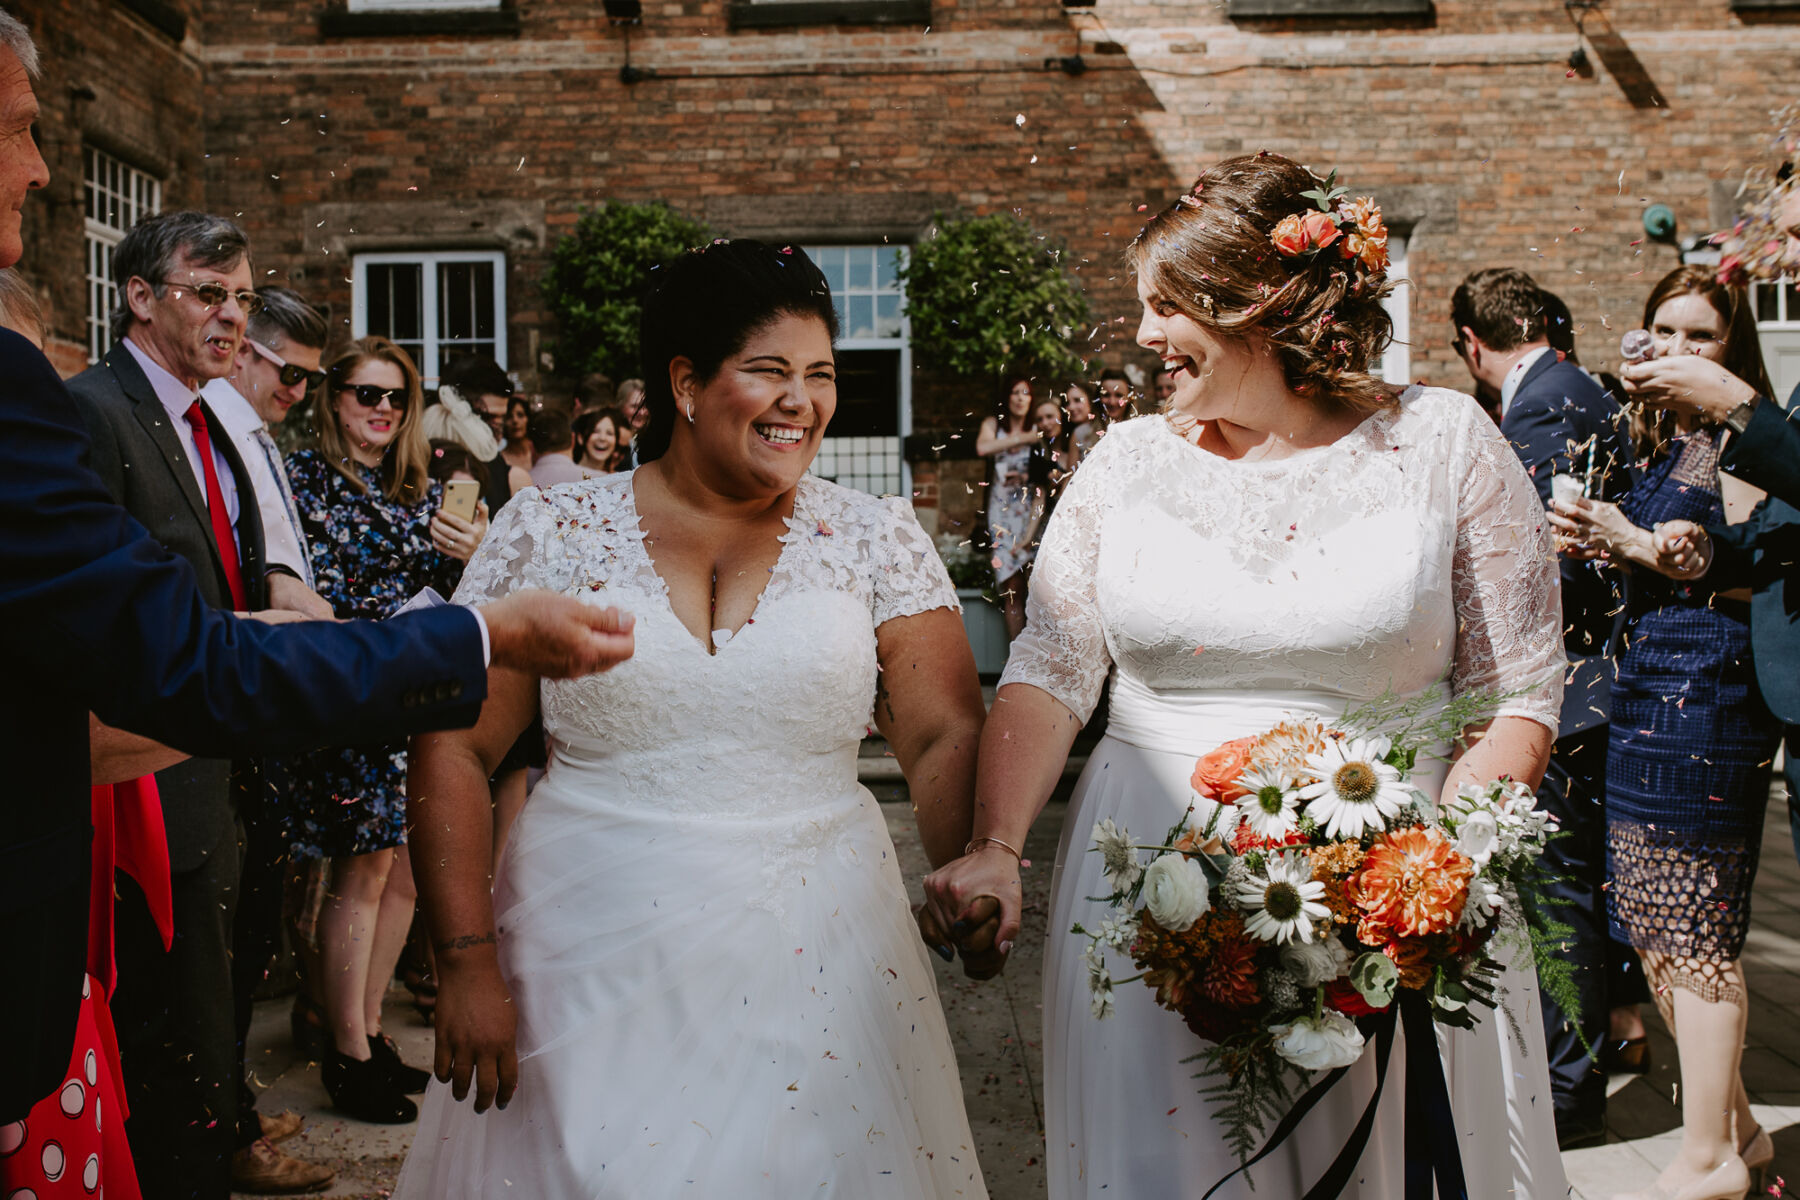 Two Brides and their Cool, Industrial Inspired Wedding in Colours of Copper and Blue at The West Mill, Derbyshire Love My Dress® UK Wedding Blog and Wedding Directory pic image